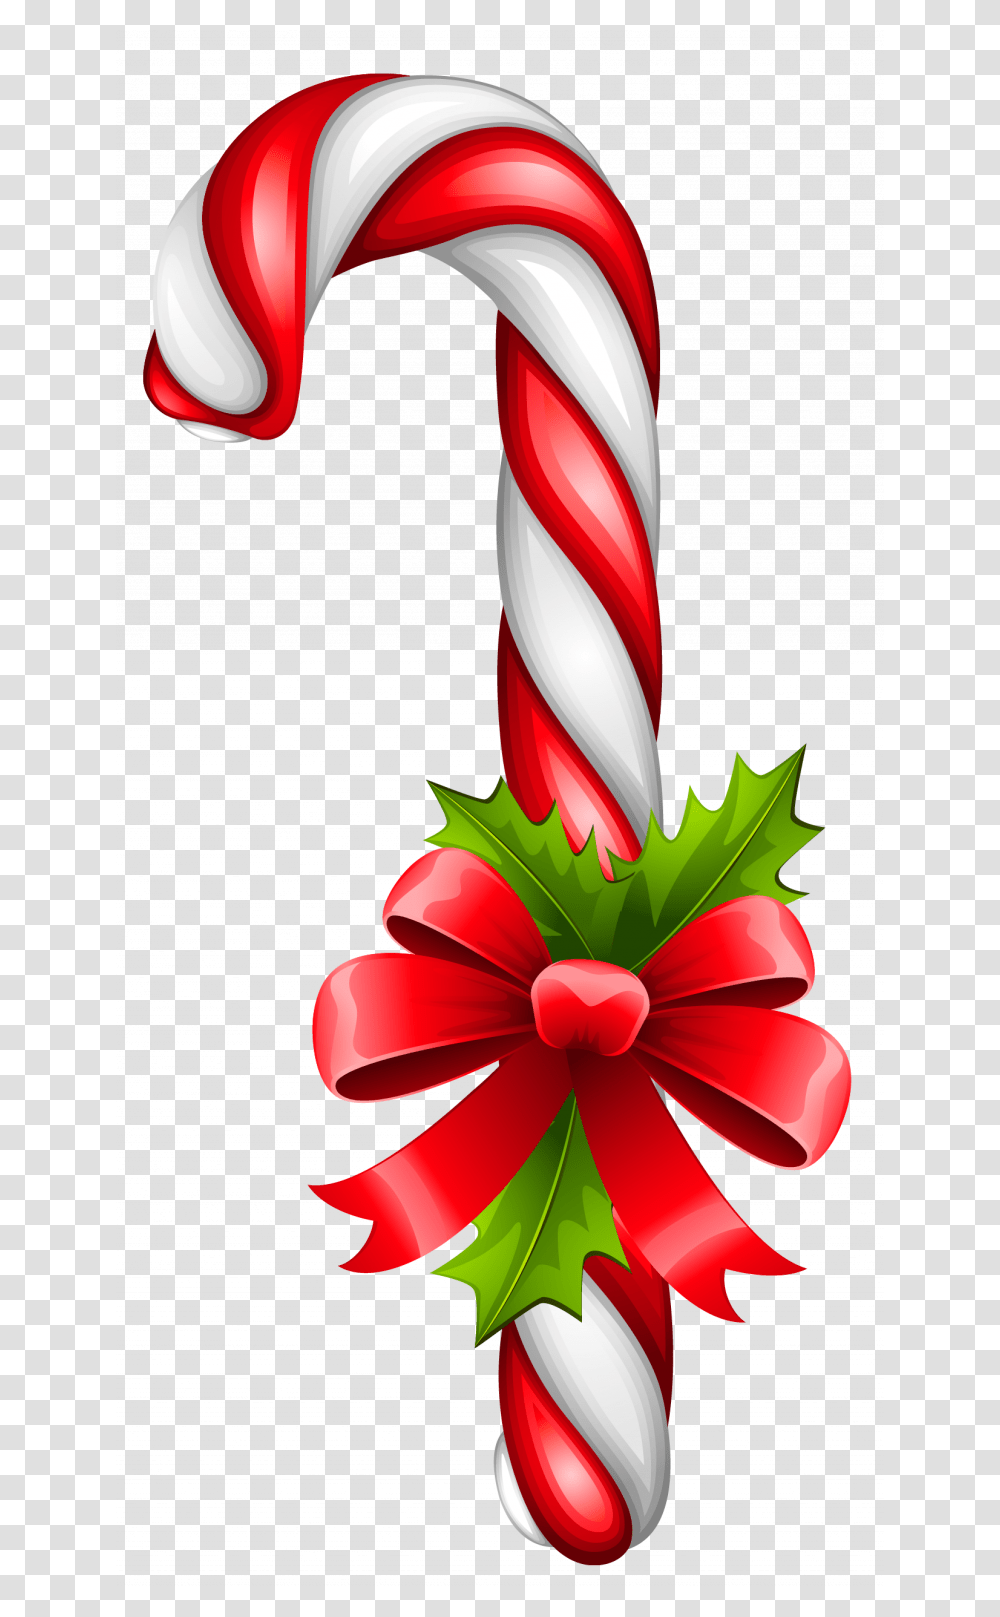 Free Download Of Christmas Candy Icon Christmas Candy Cane, Plant, Gift, Tree Transparent Png